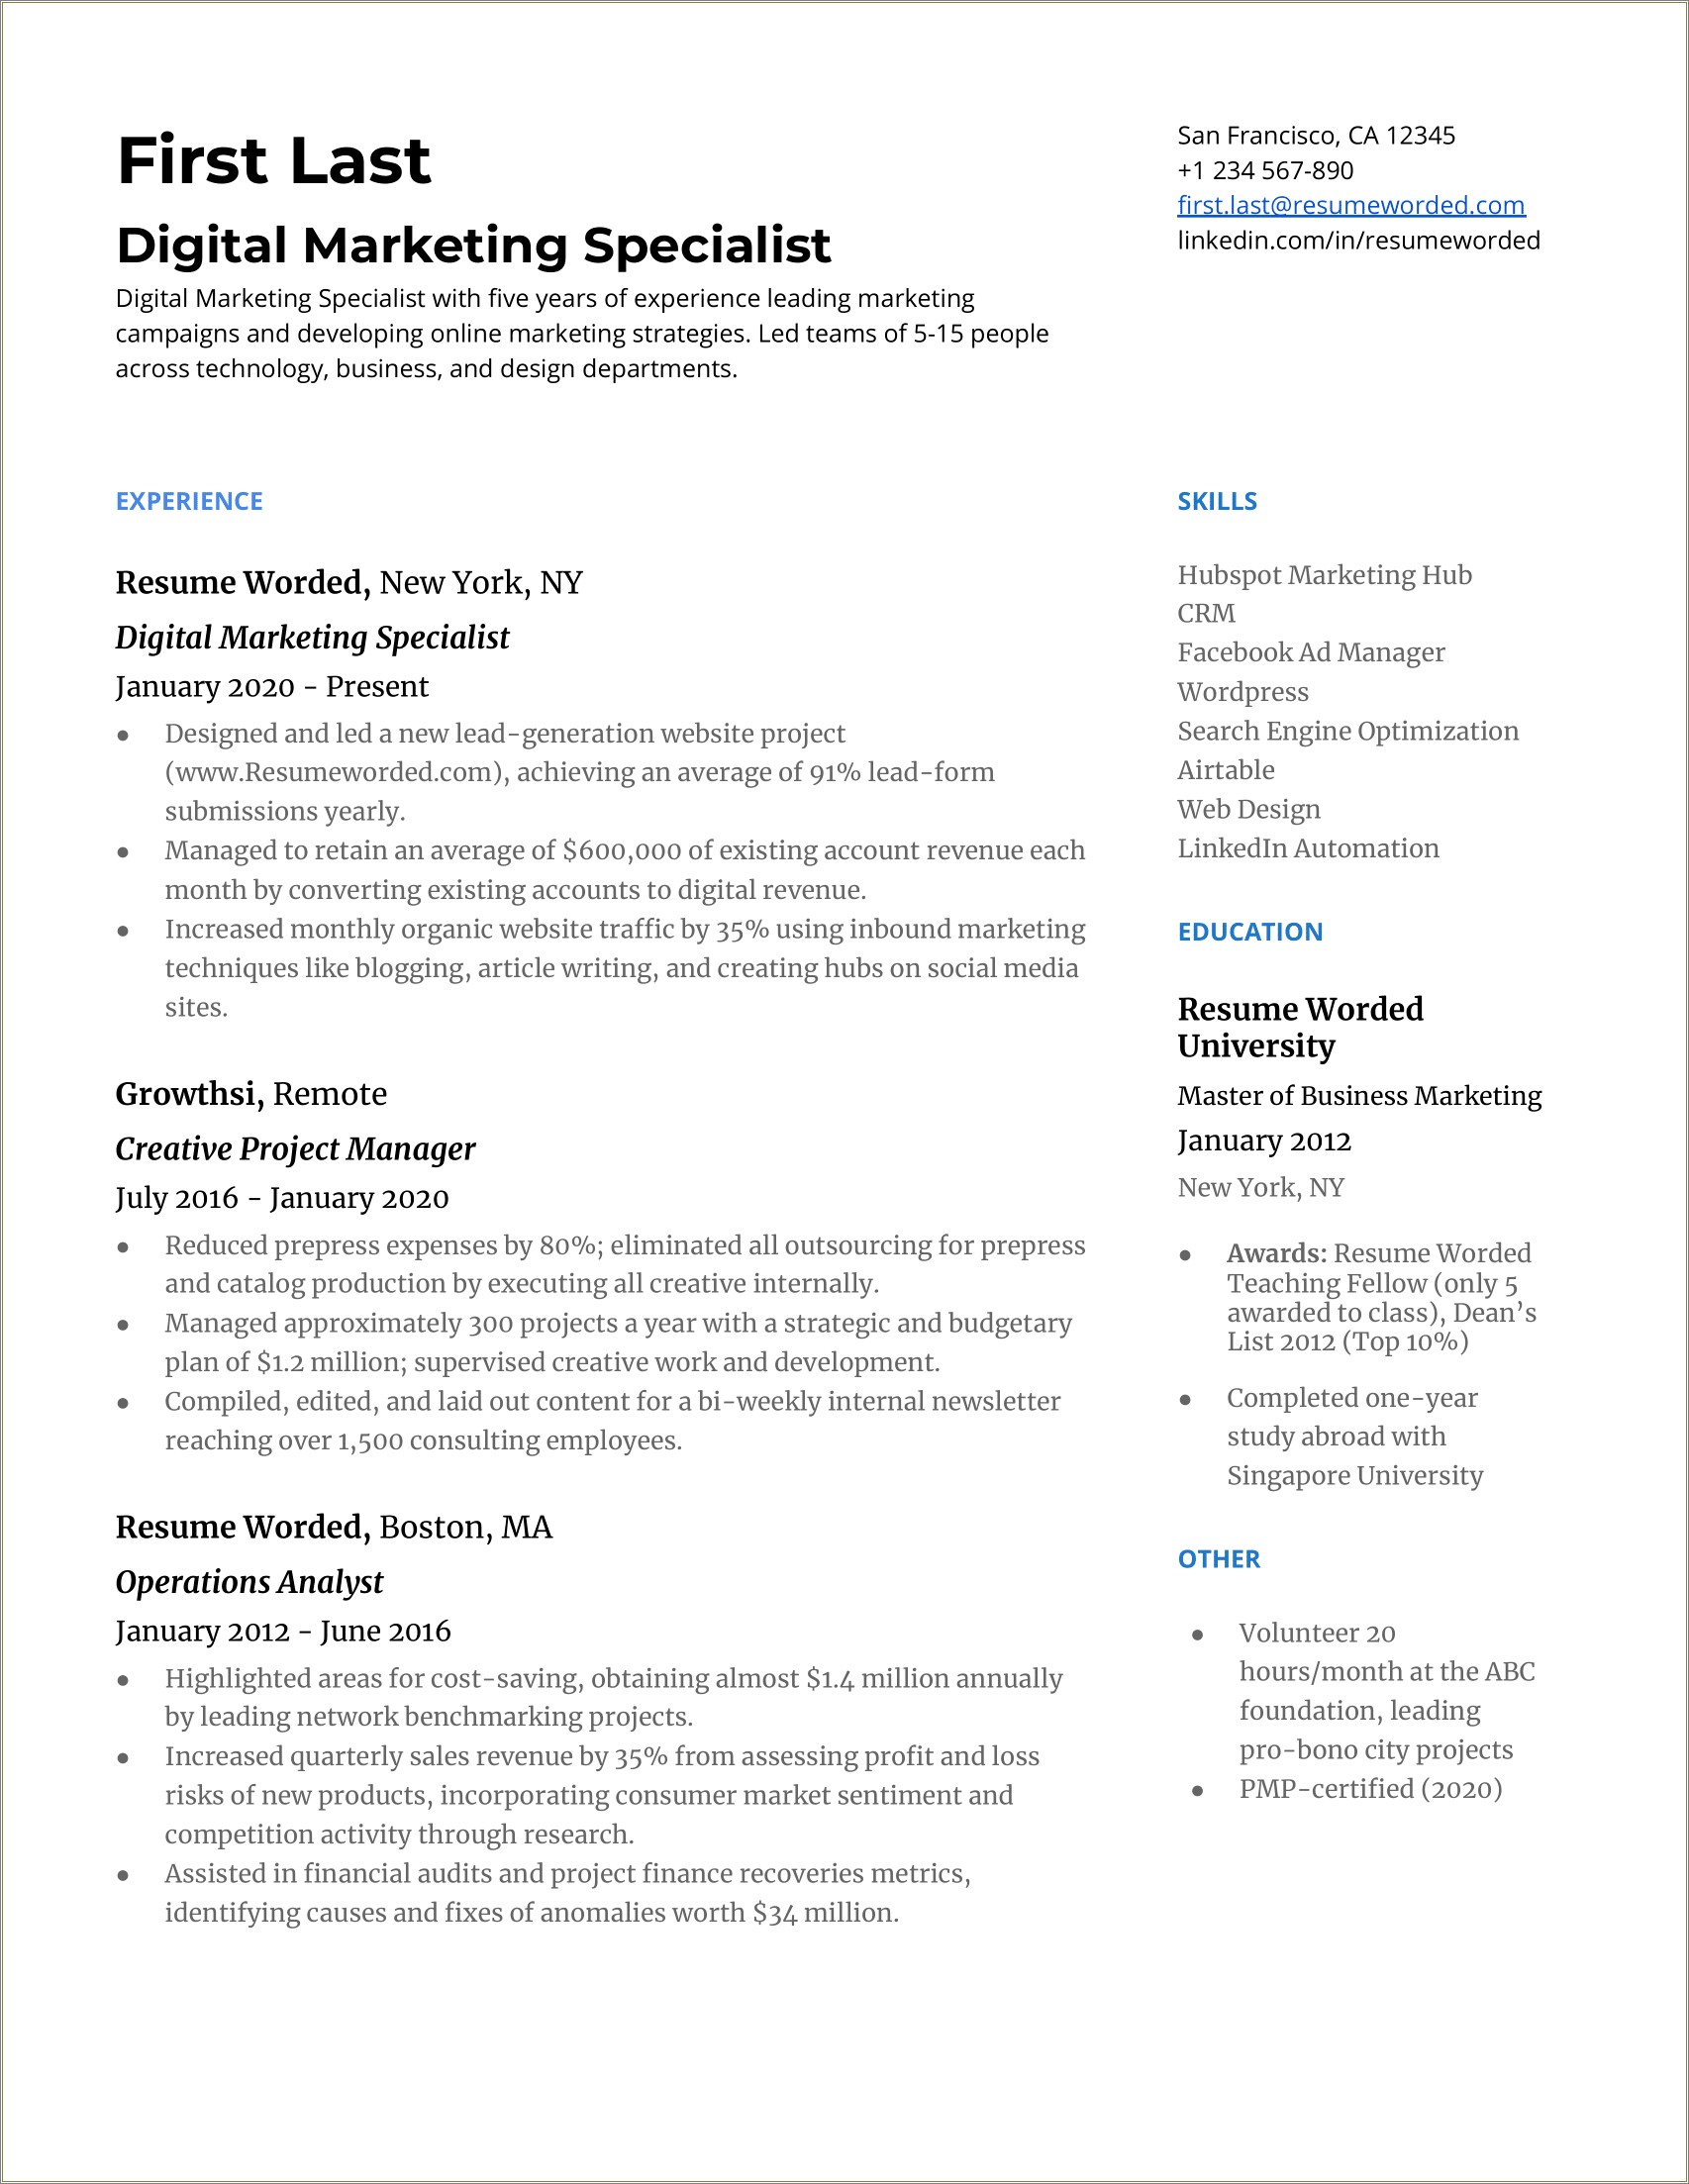 Sample Resume For 5 Years Experience